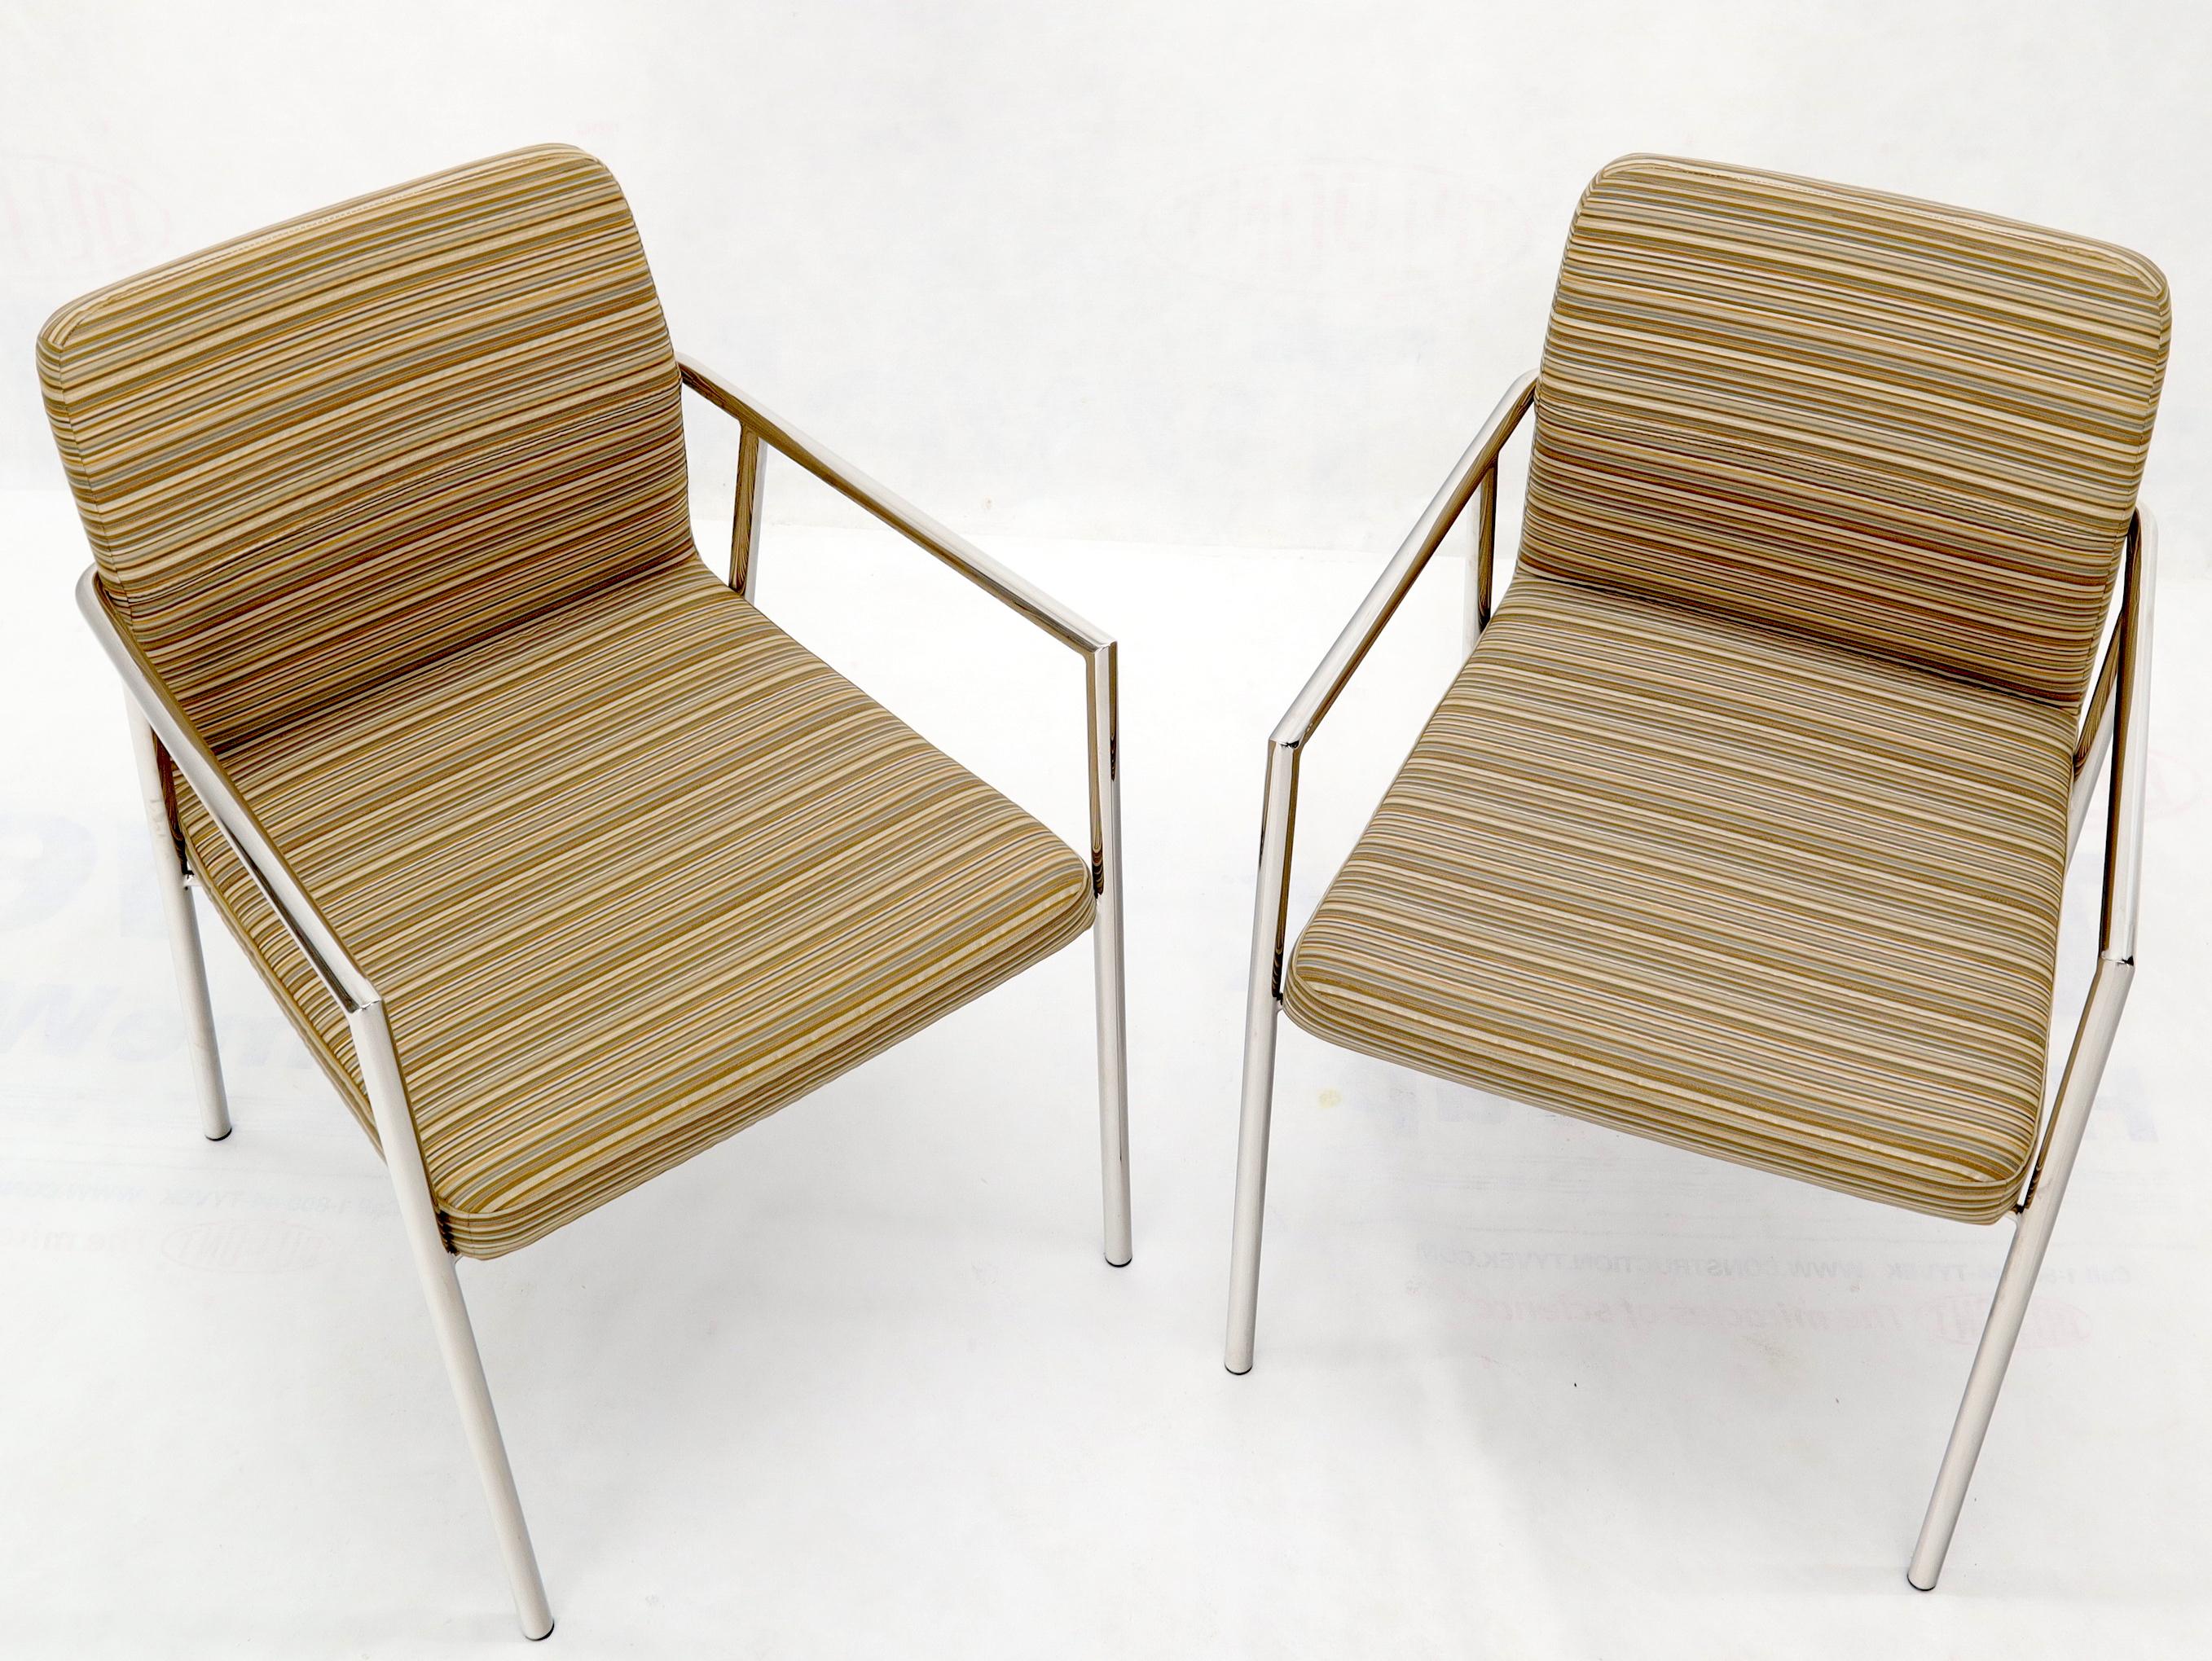 Pair of Bauhaus Style Mid-Century Modern Style Chairs by Bernhardt In Excellent Condition For Sale In Rockaway, NJ